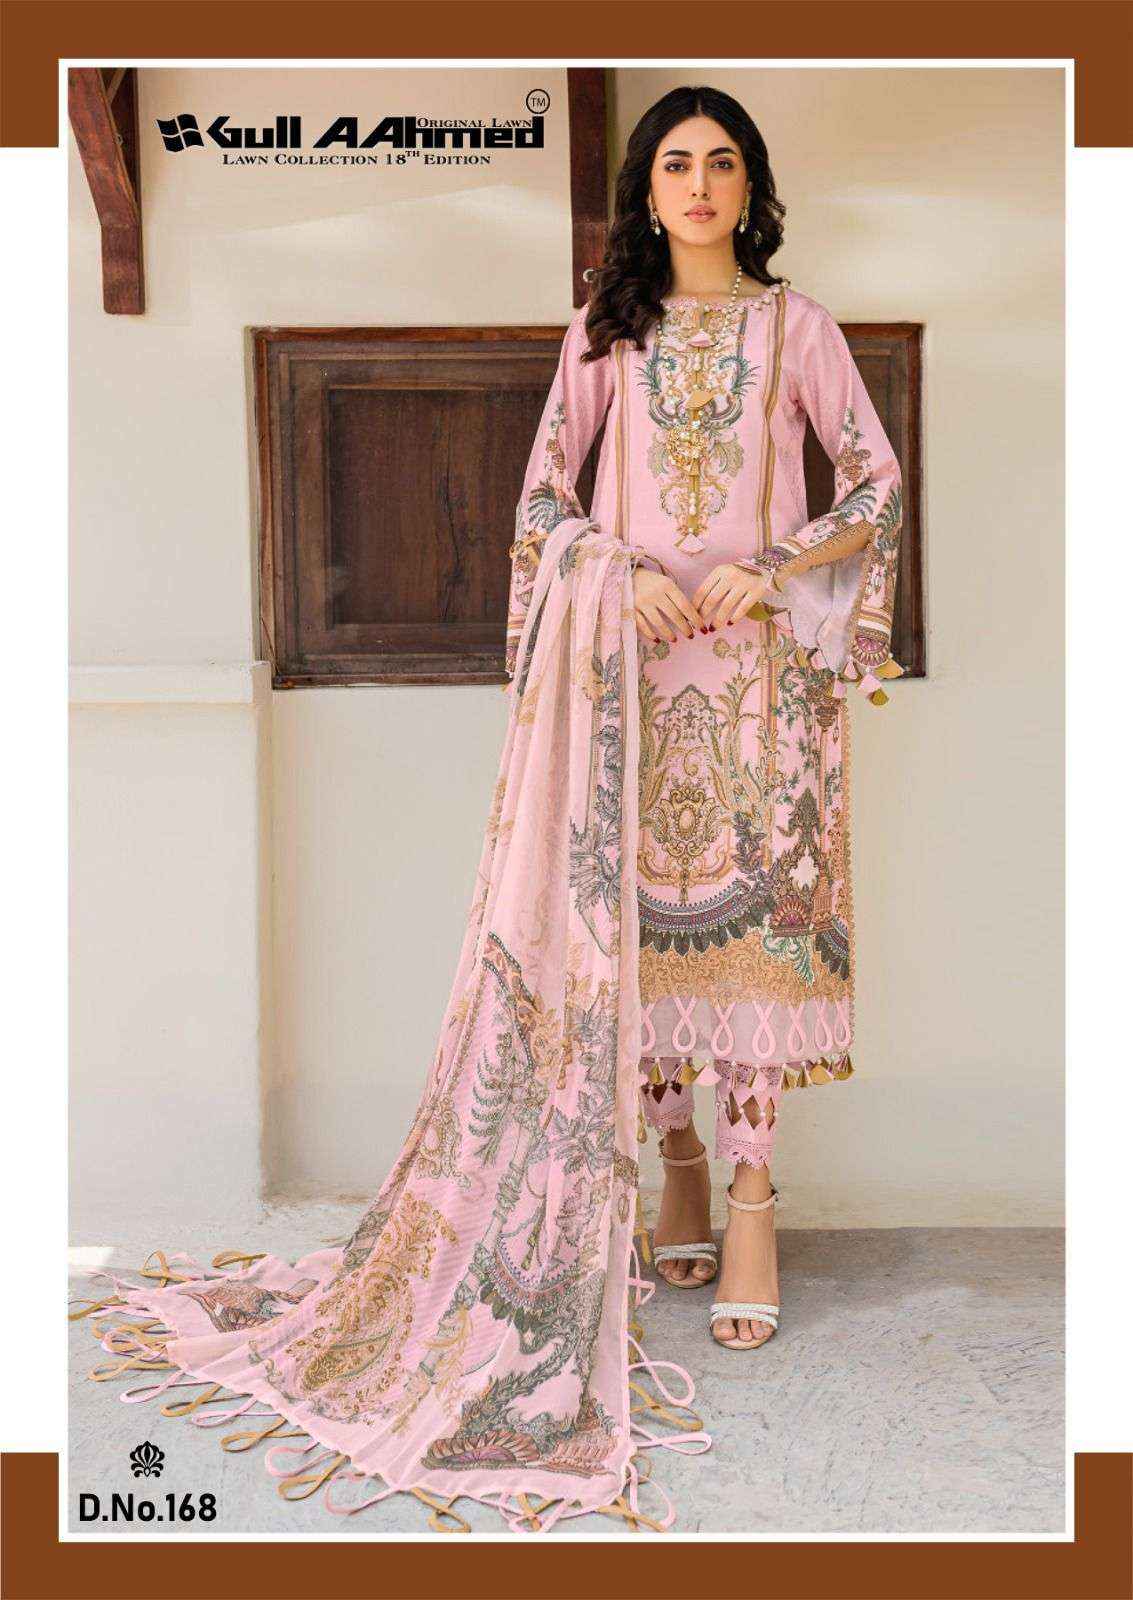 GULL AAHMED LAWN COLLECTION VOL 18 COTTON DIGITAL PRINT SUITS